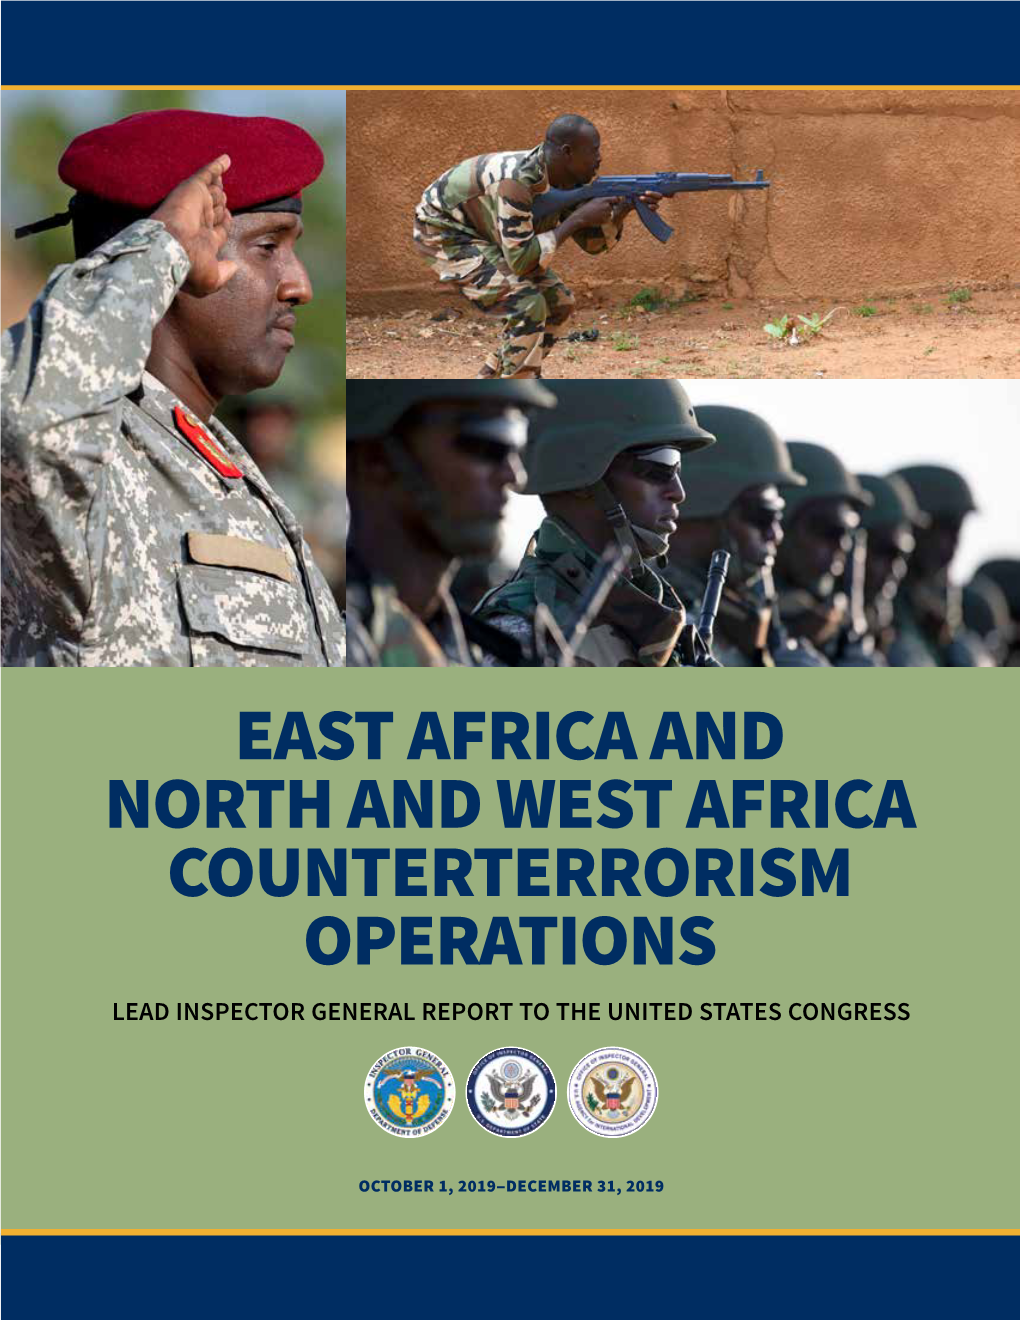 East Africa and North and West Africa Counterterrorism Operations Lead Inspector General Report to the United States Congress